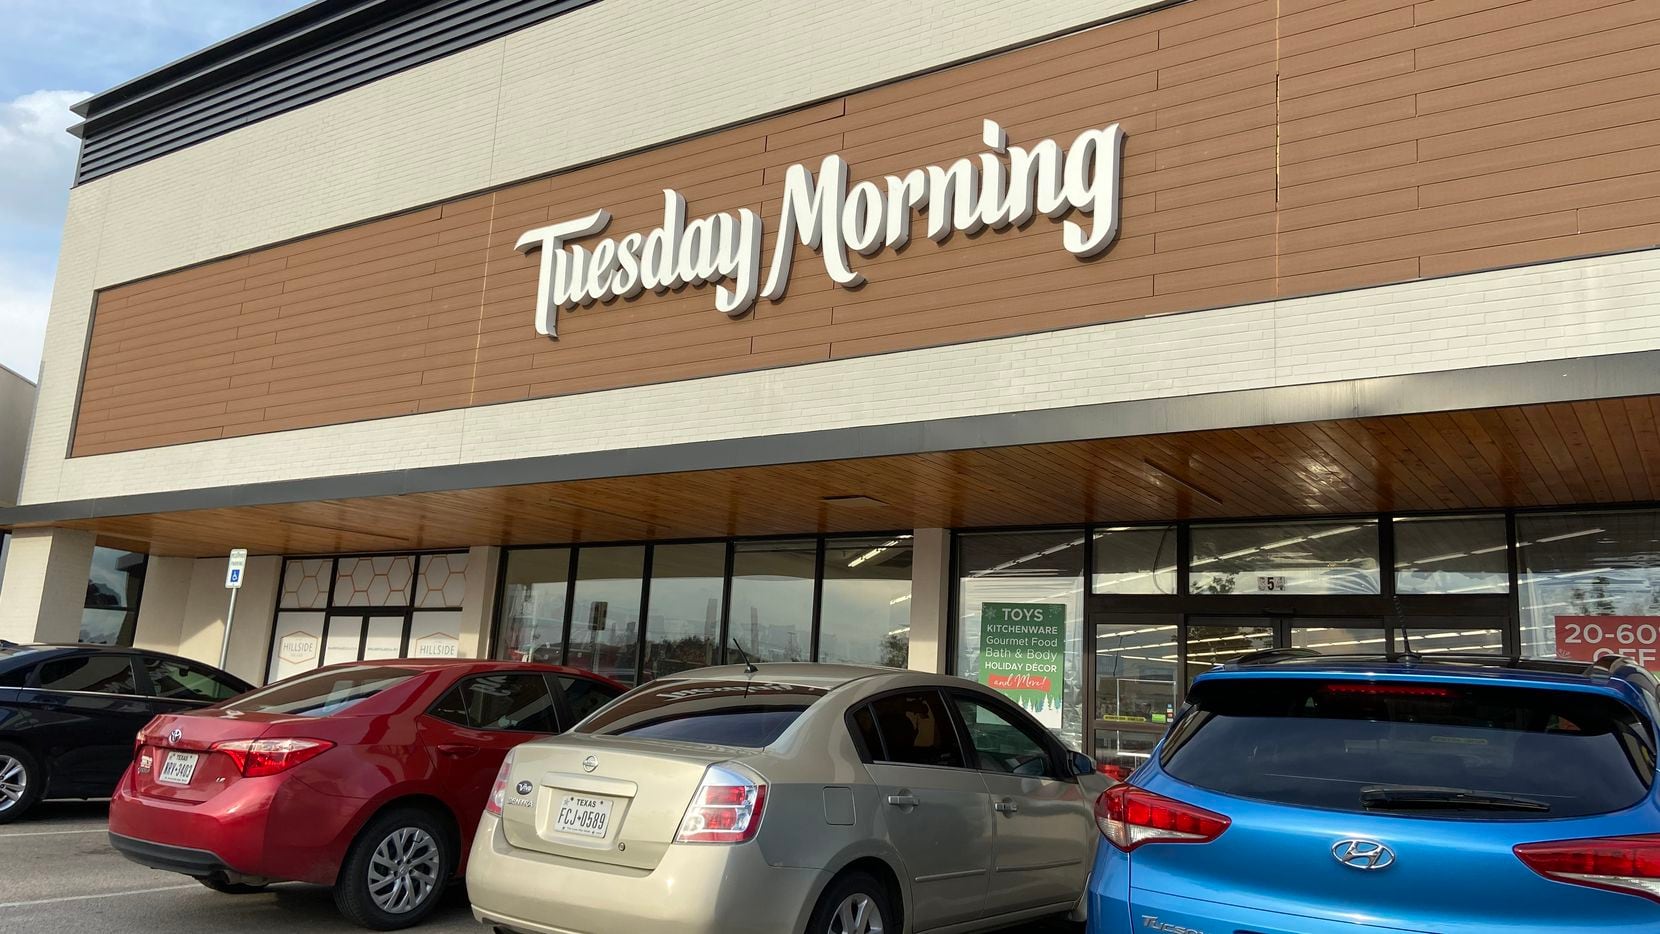 Dallas-based retailer Tuesday Morning says it plans to go private